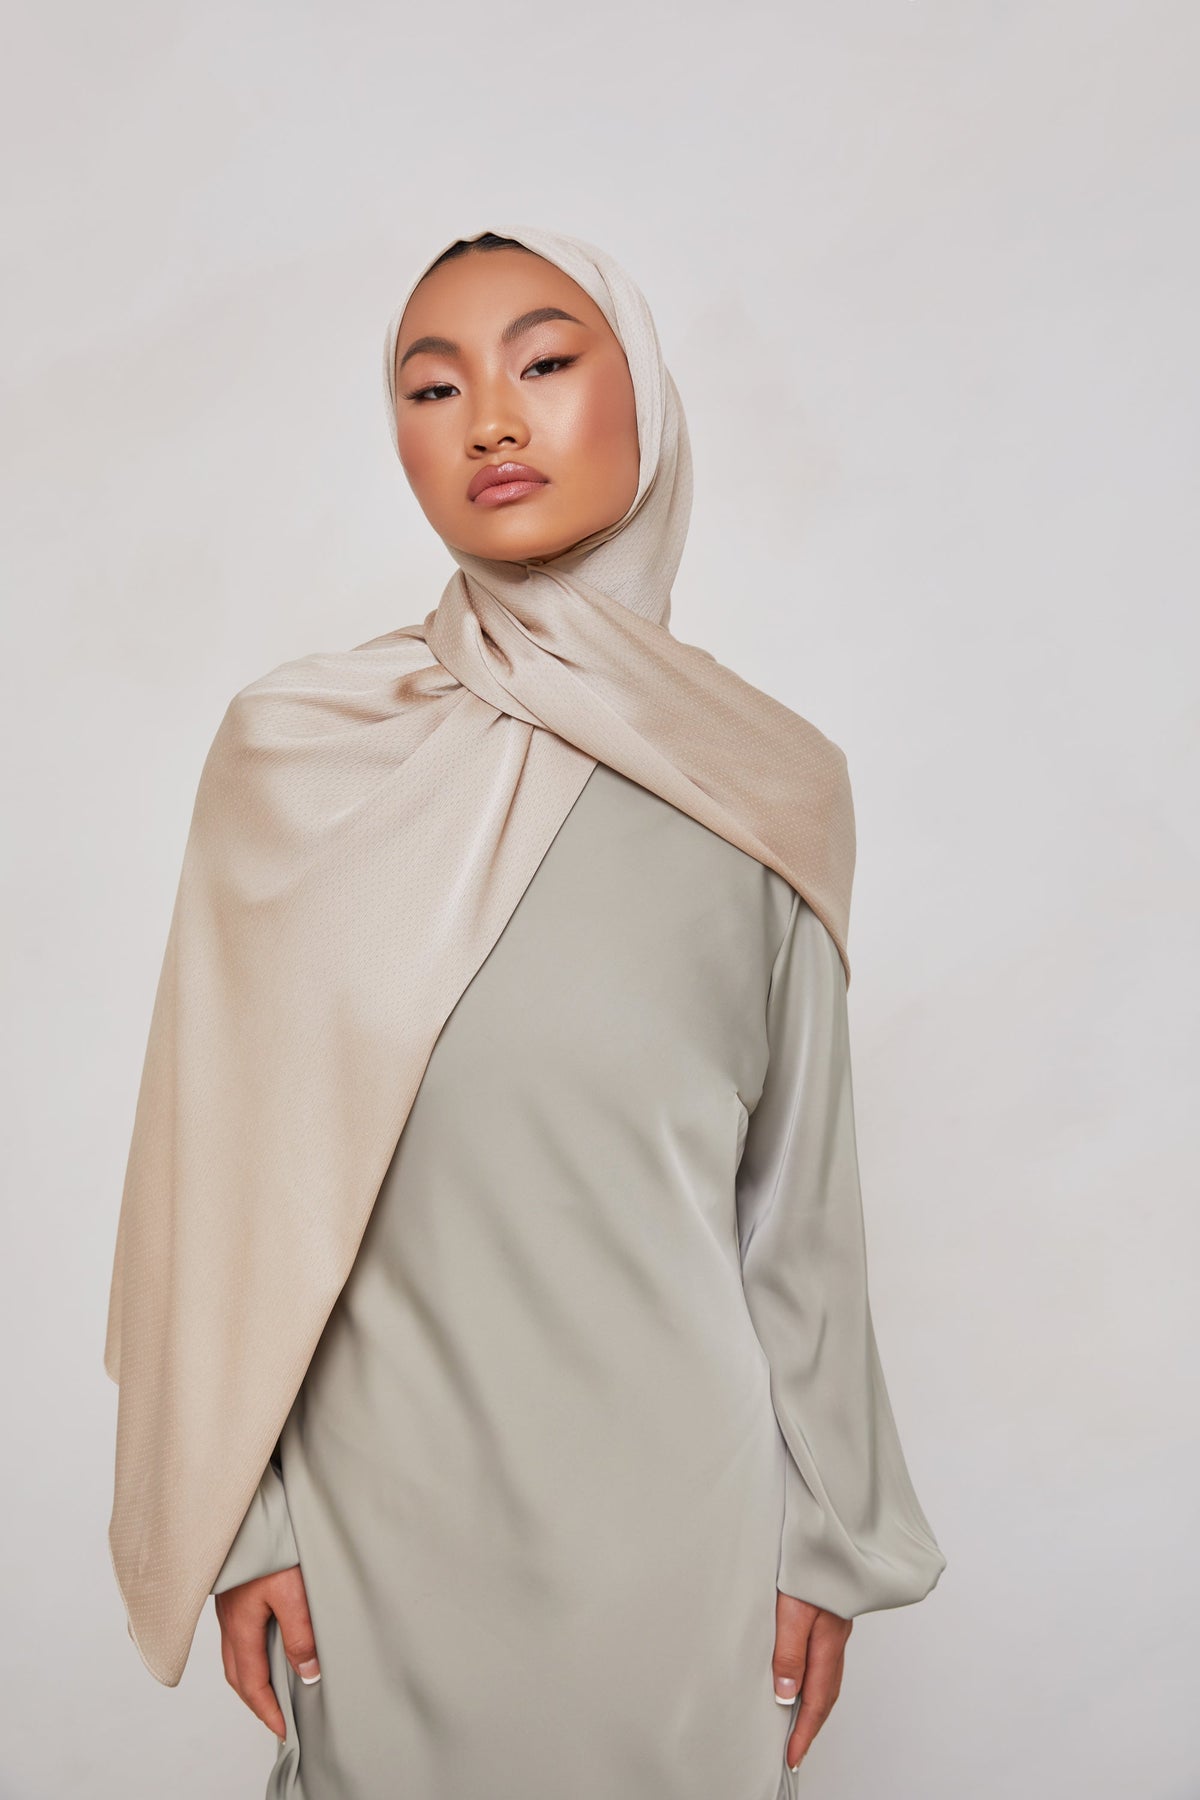 TEXTURE Crepe Hijab - Taupe Dots epschoolboard 